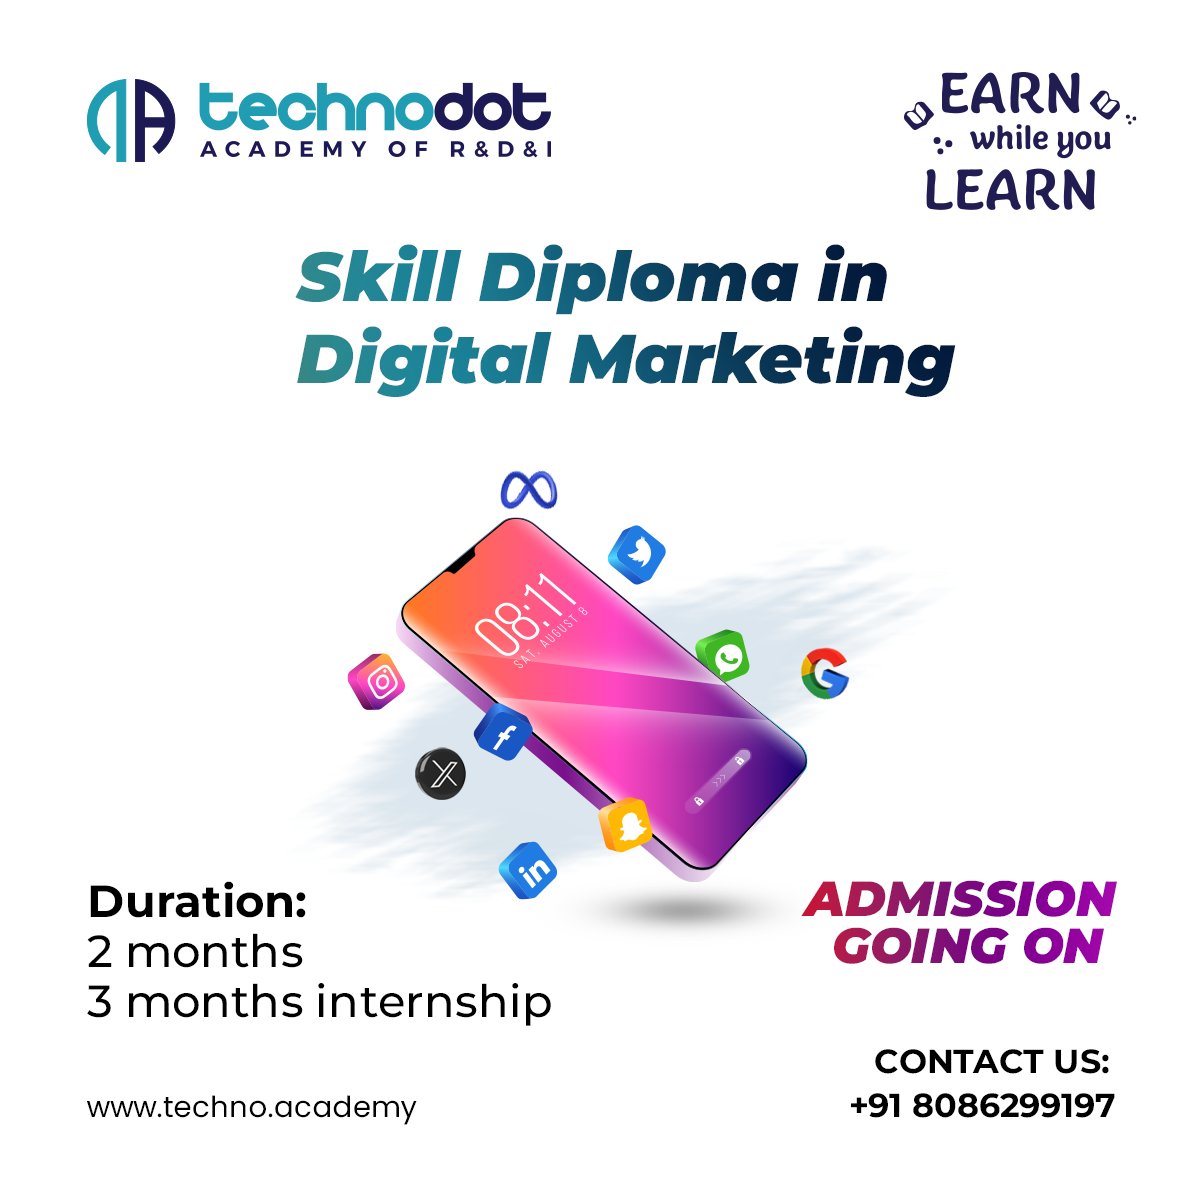 Join our job-oriented courses and start a successful career.

ADMISSION GOING ON

Enroll Now
Call:+91 8086299197

#TechnoDotAcademy #kerala #calicut